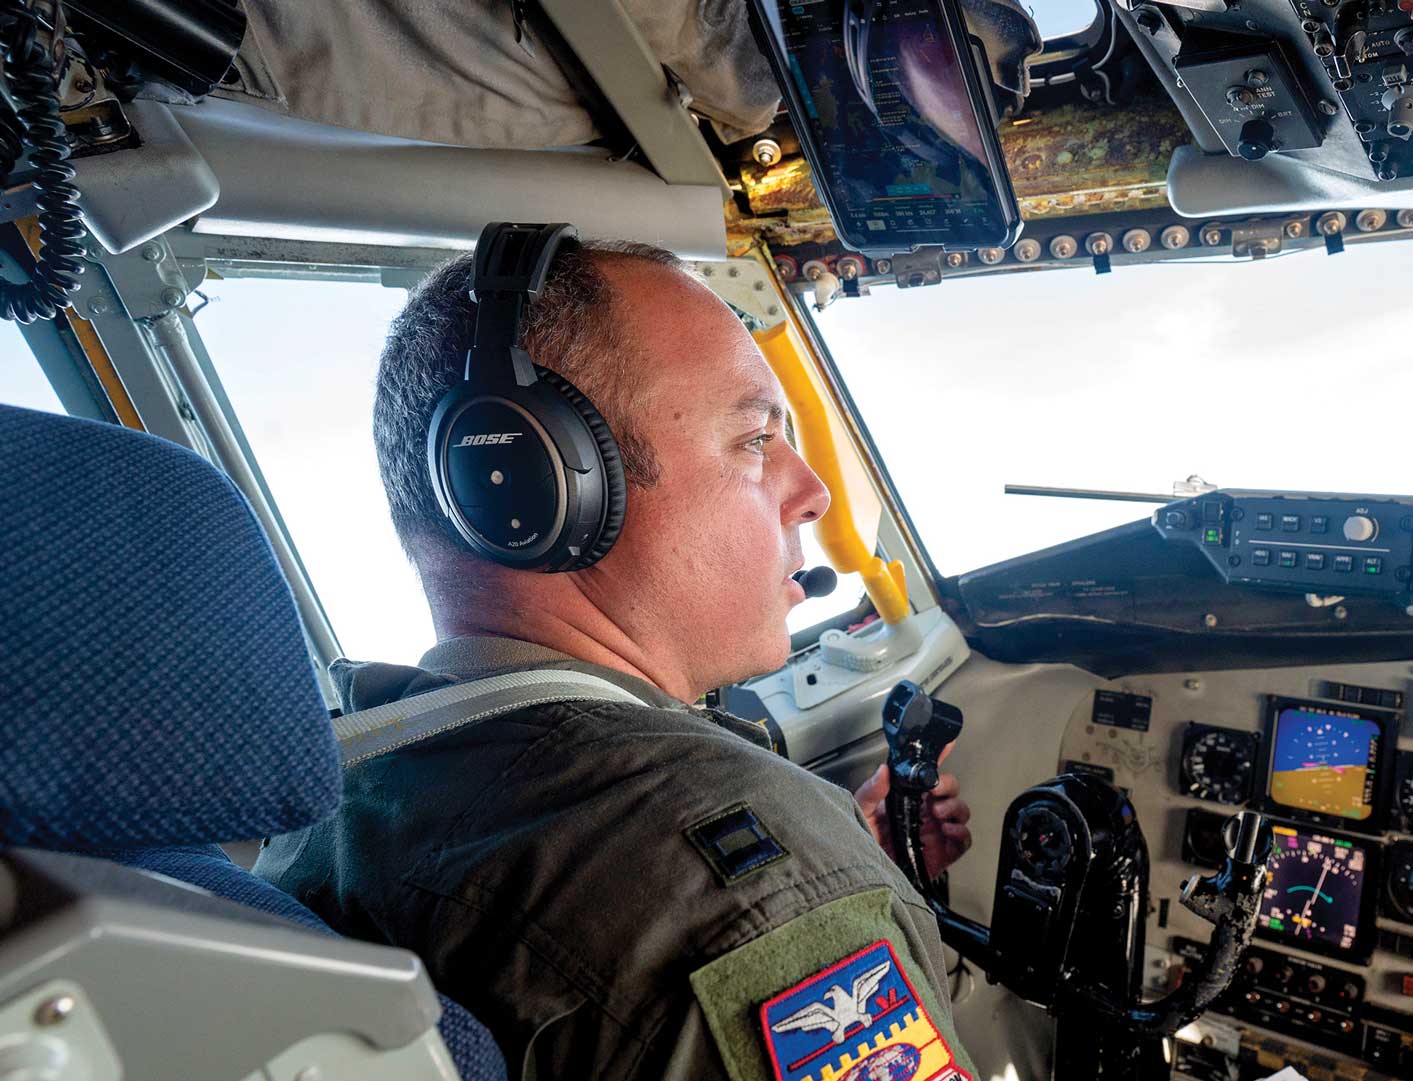 A man in the cockpit of an airplane.